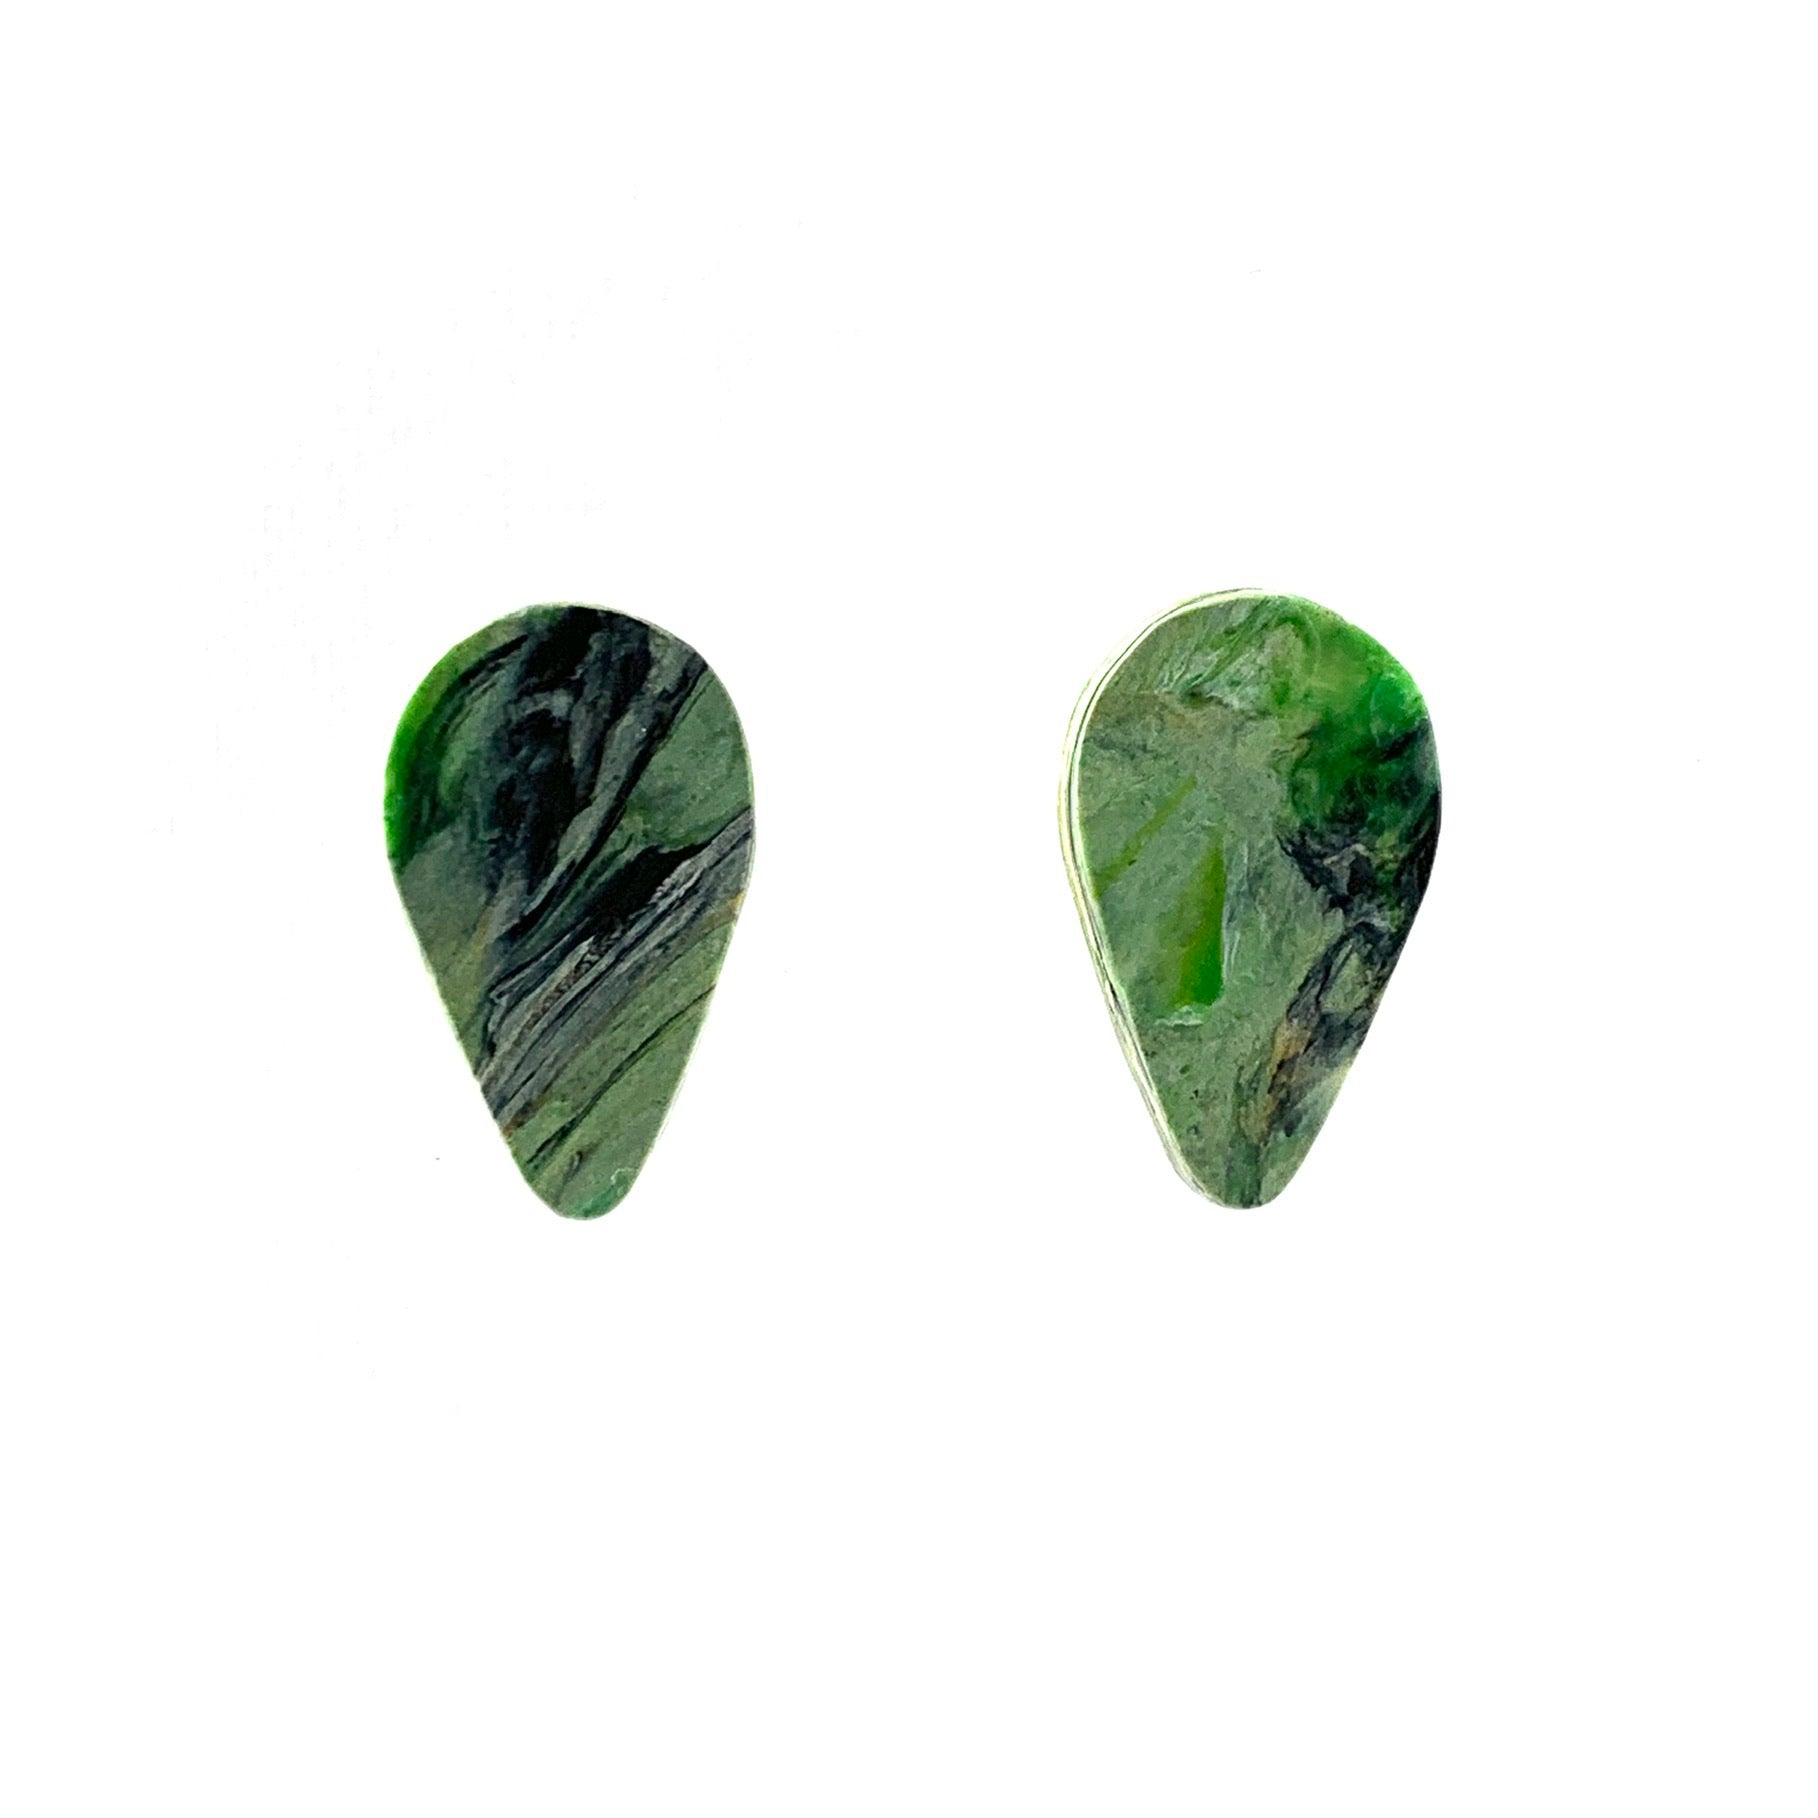 Handmade Sustainable Earrings Studs Made from Recycled Plastic Artesian Teardrops Gift for her